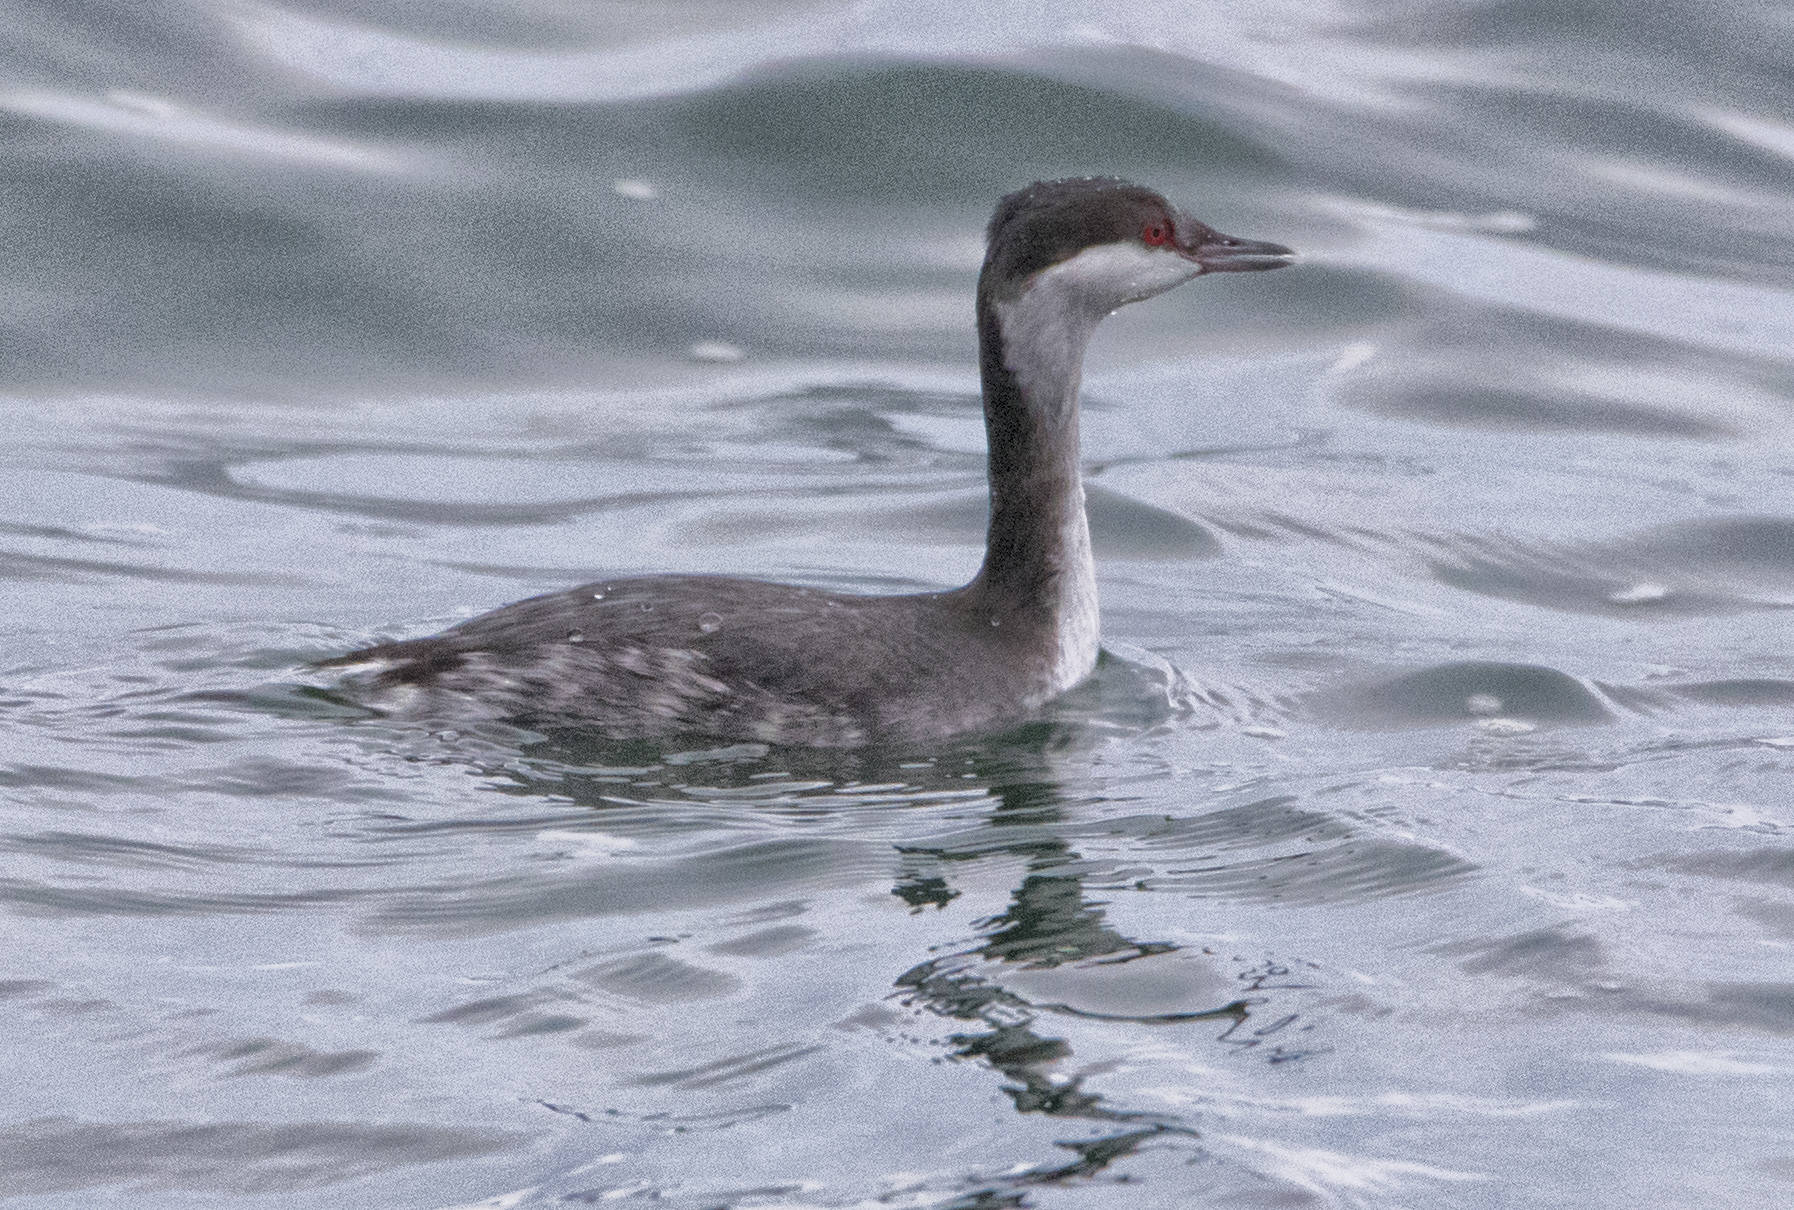 A winter horned grebe swims at Auke Recreation Area Cove on Friday, Dec. 18. (Courtesy Photo / Kenneth Gill, gilfoto)